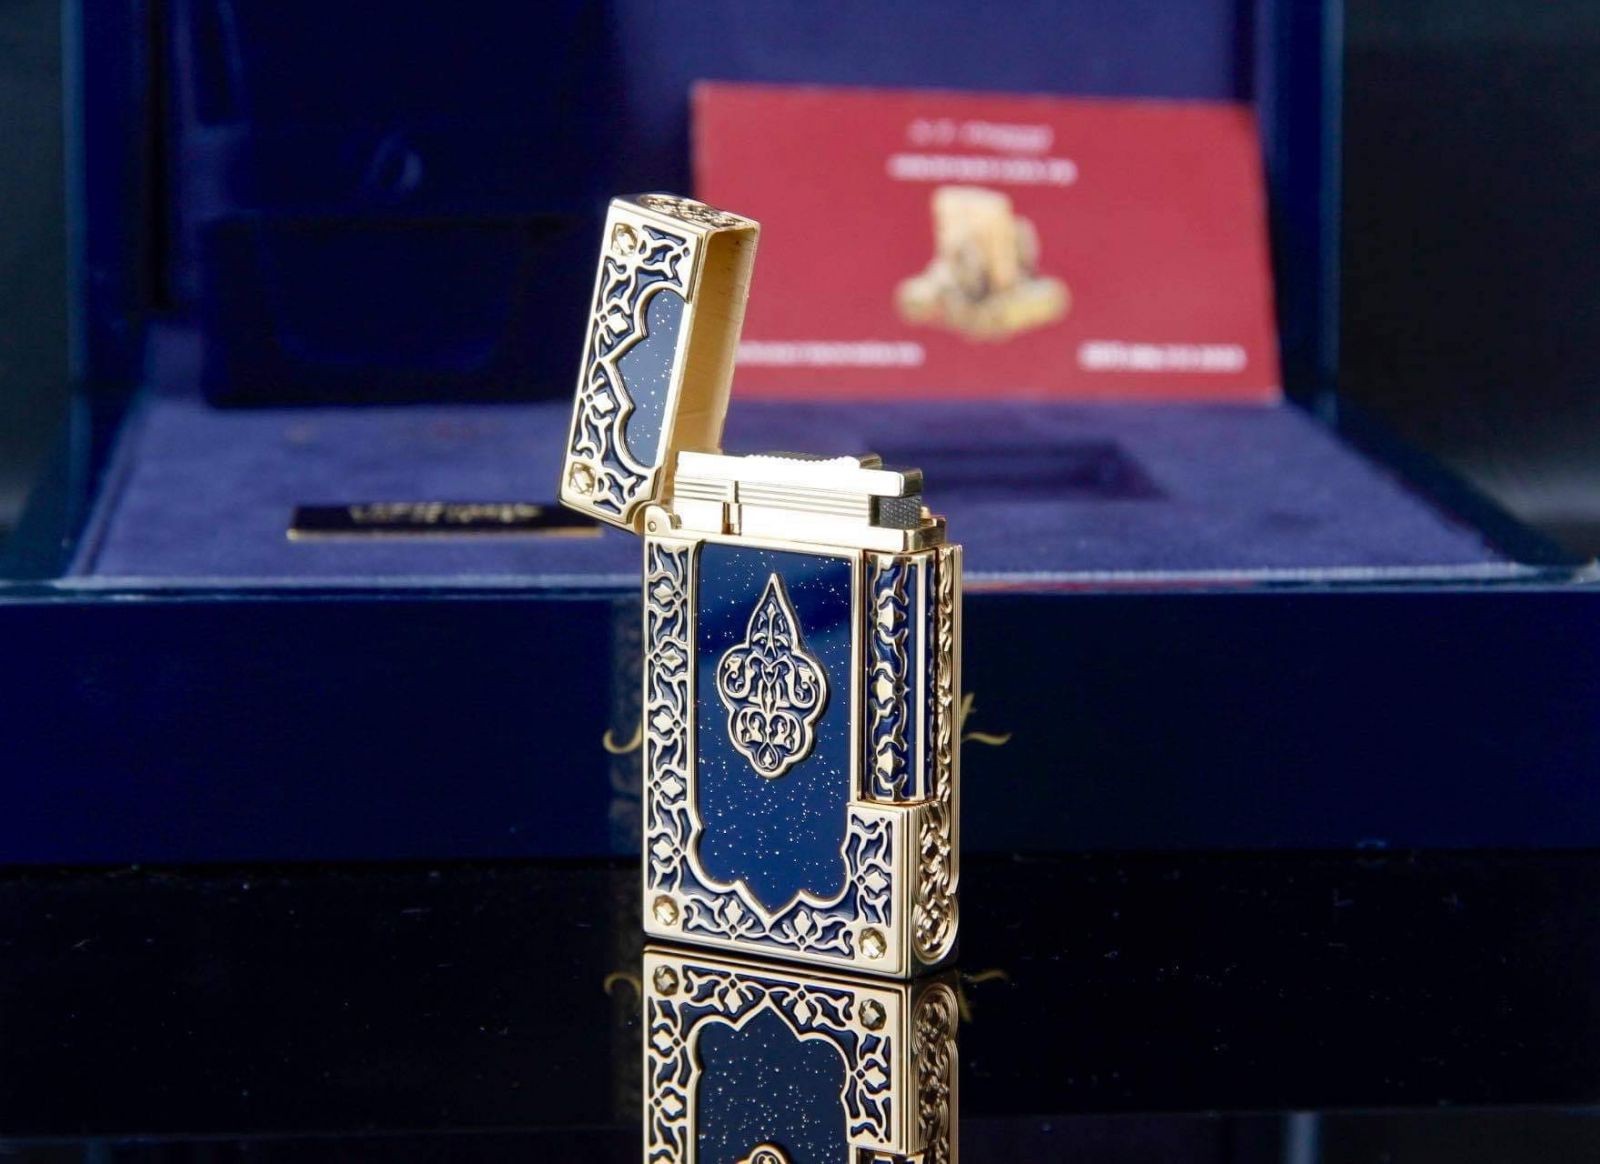 Top 10 Most Expensive Lighters in the World